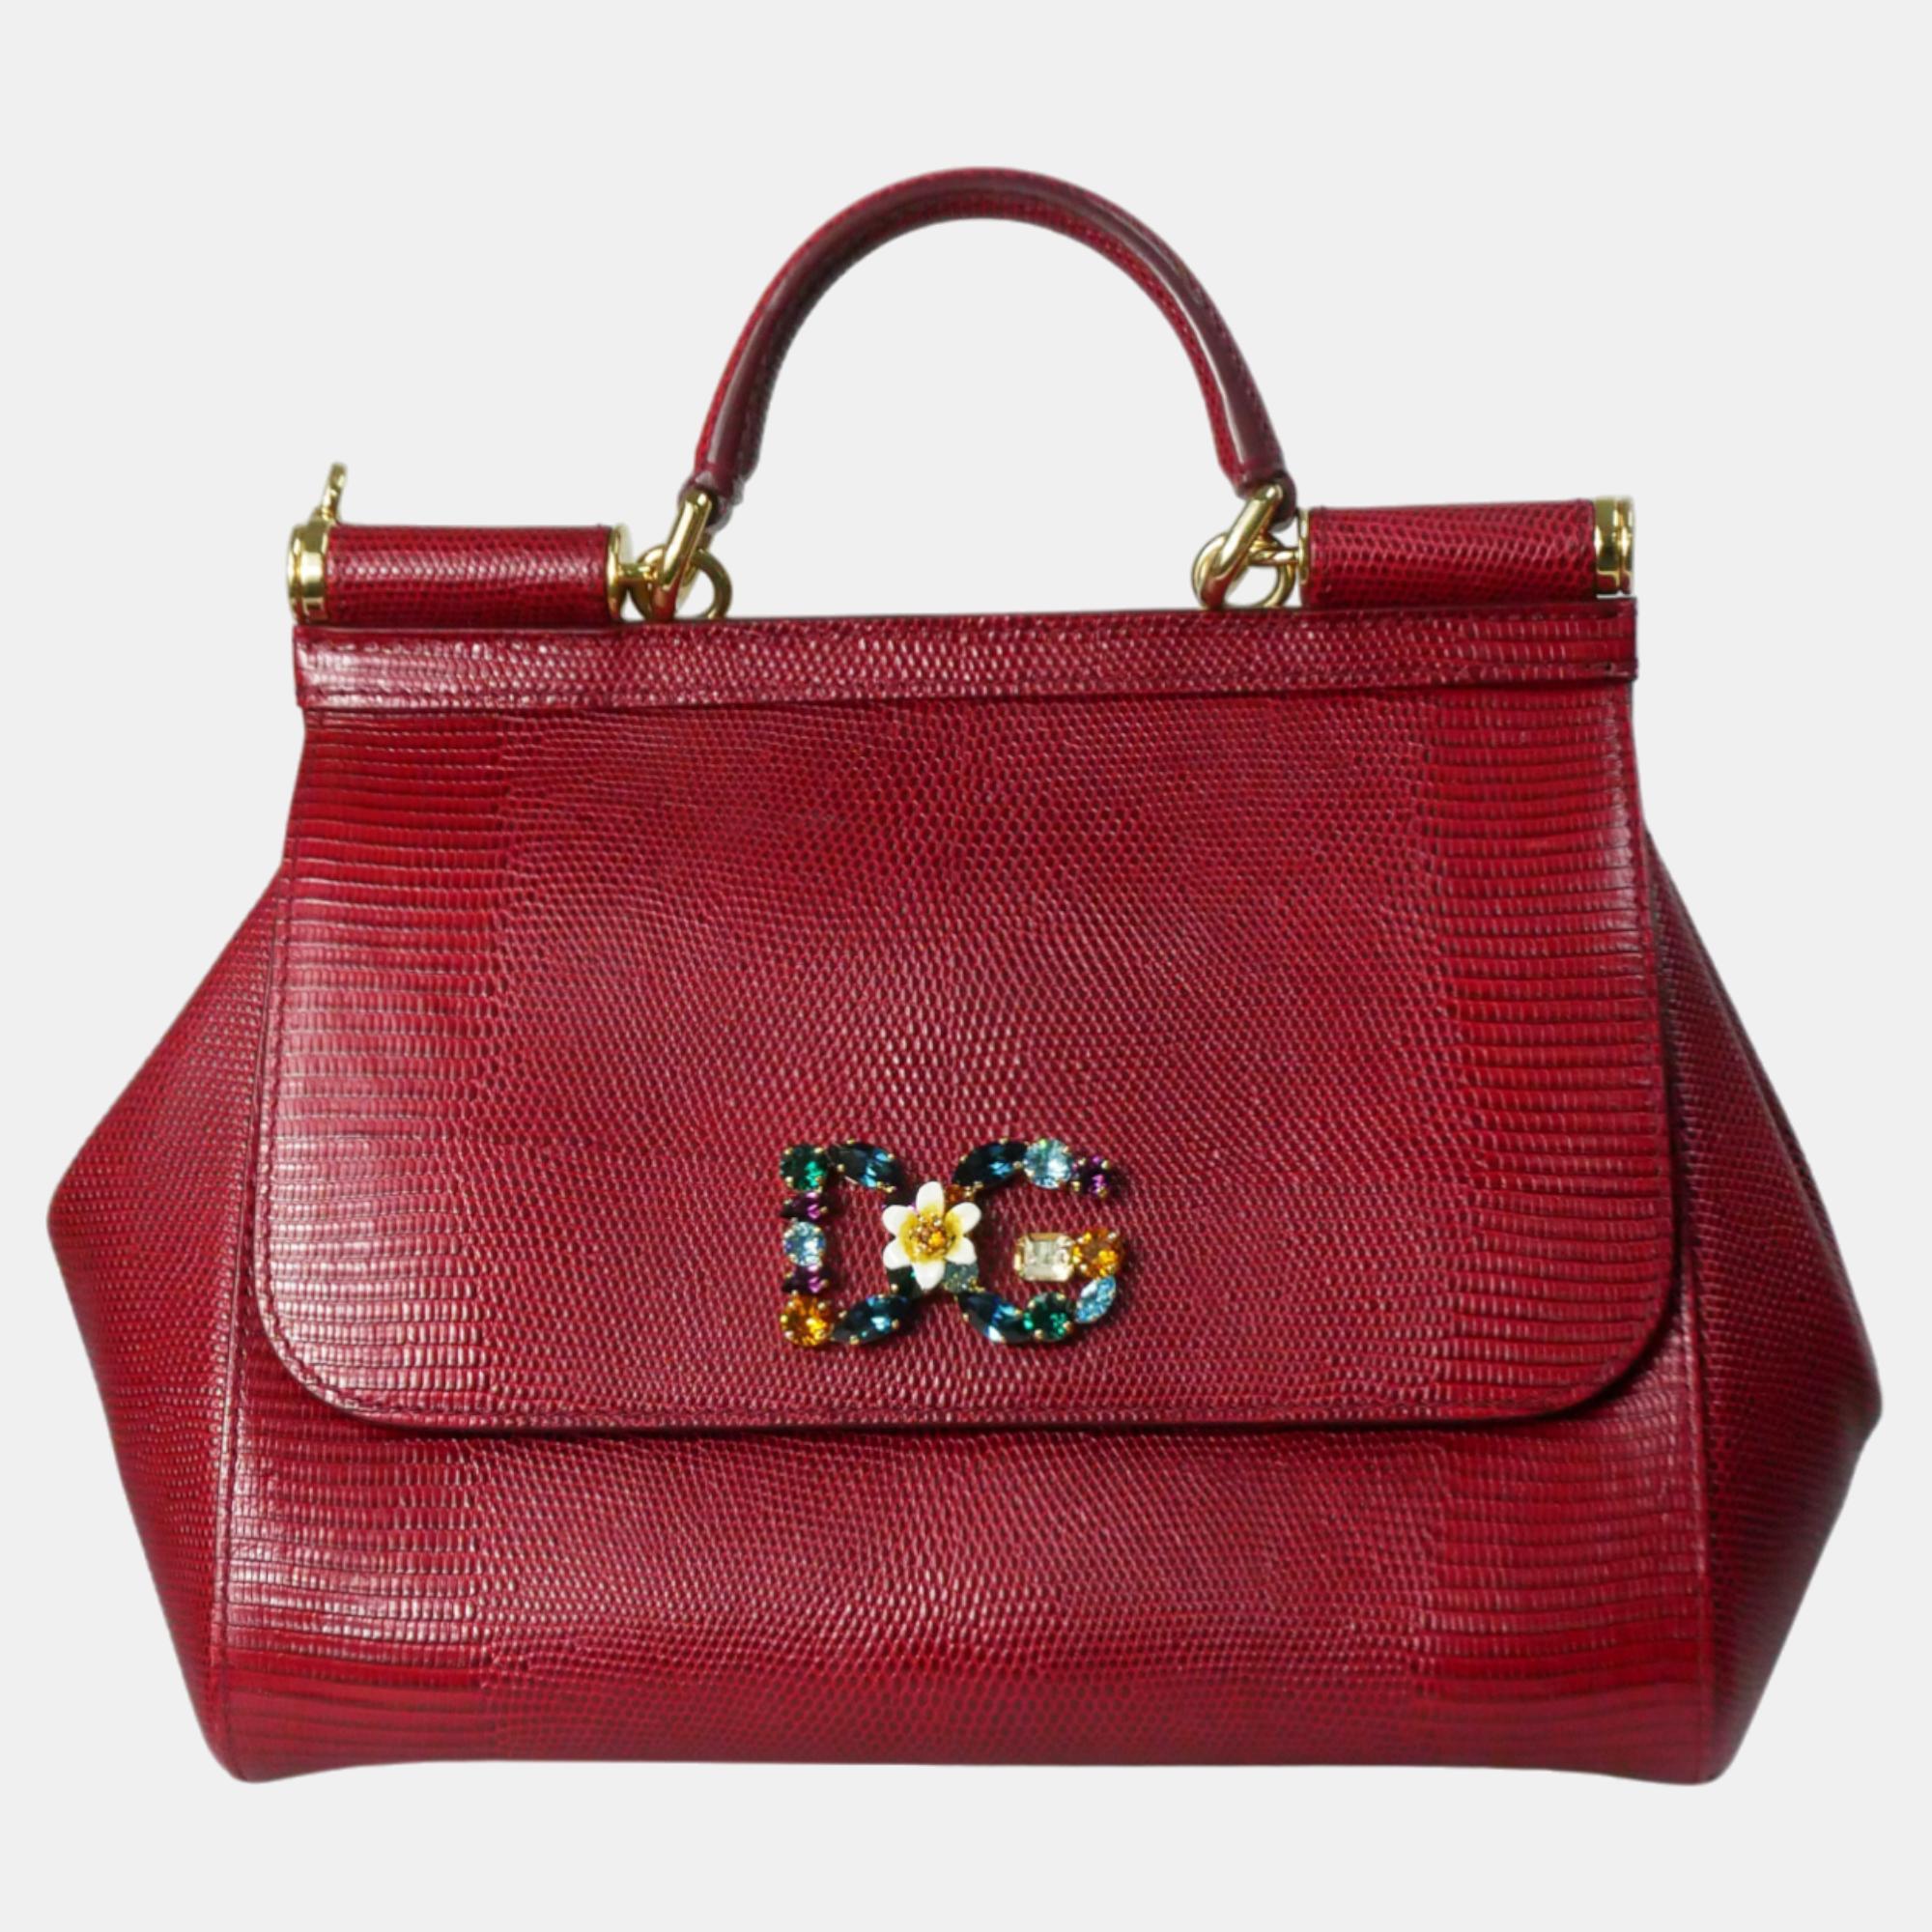 Dolce & gabbana red leather sicily bag